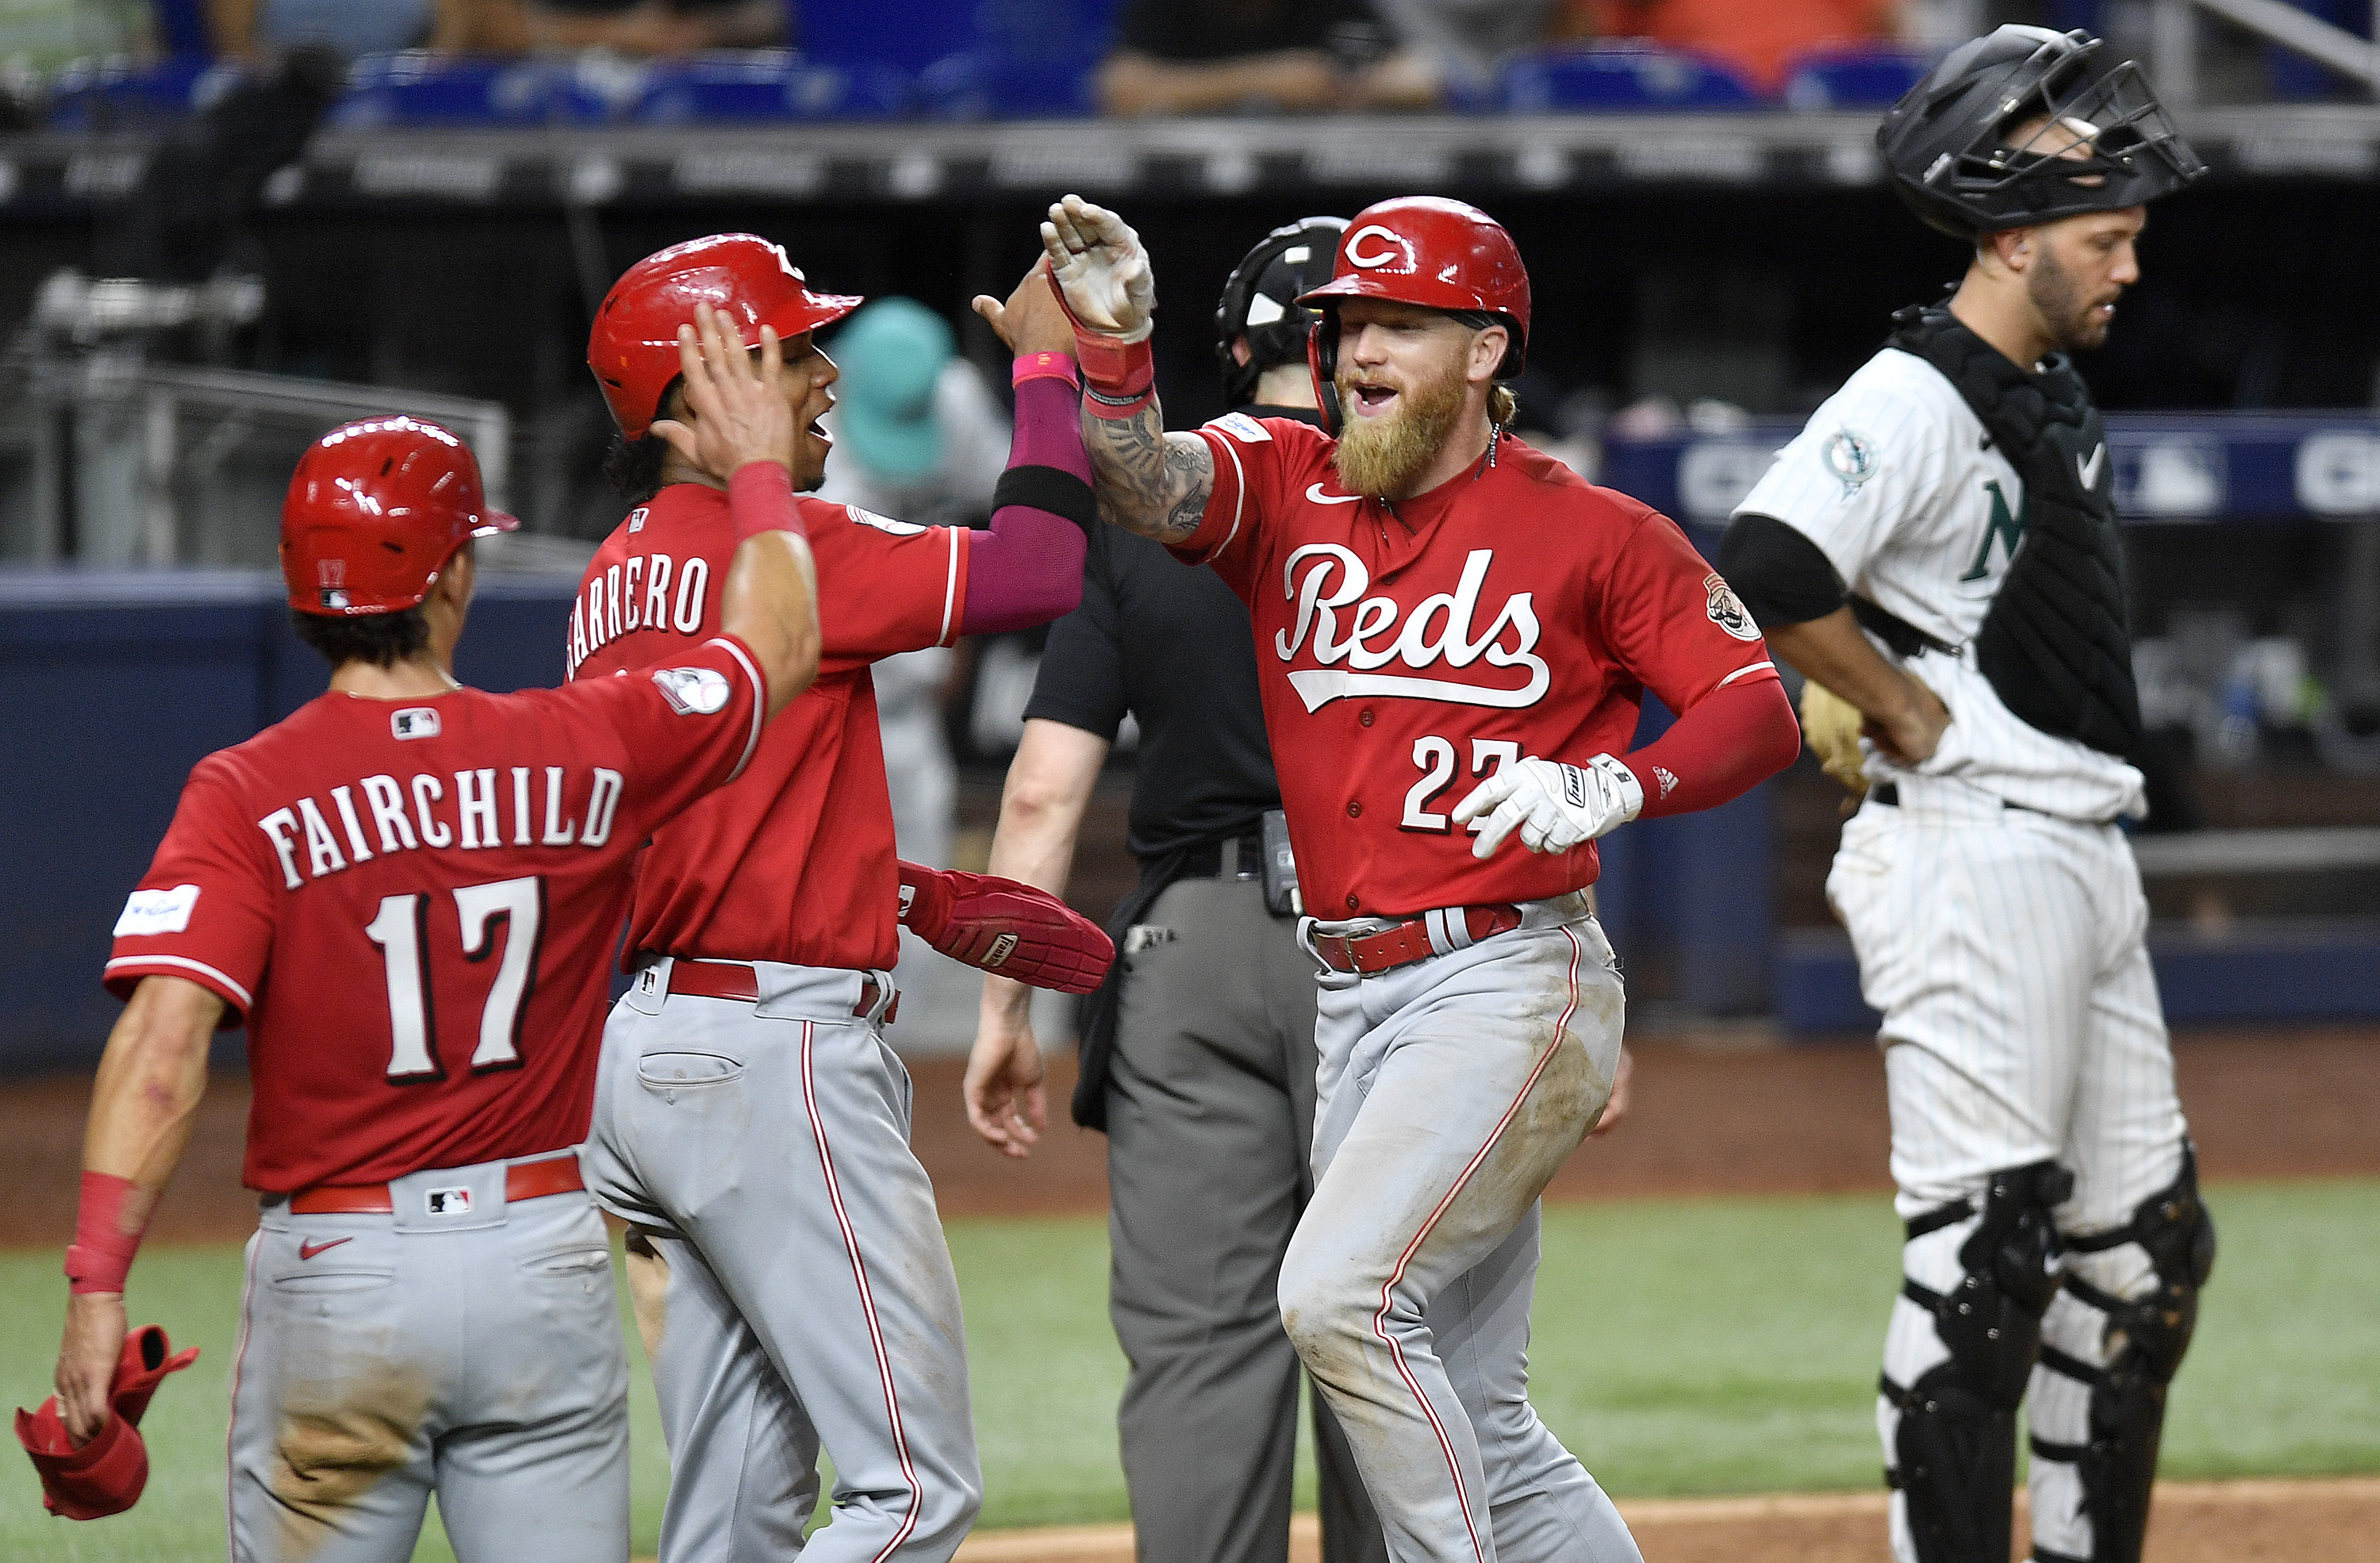 Fraley homers twice, hits tiebreaking shot in 9th as Reds beat